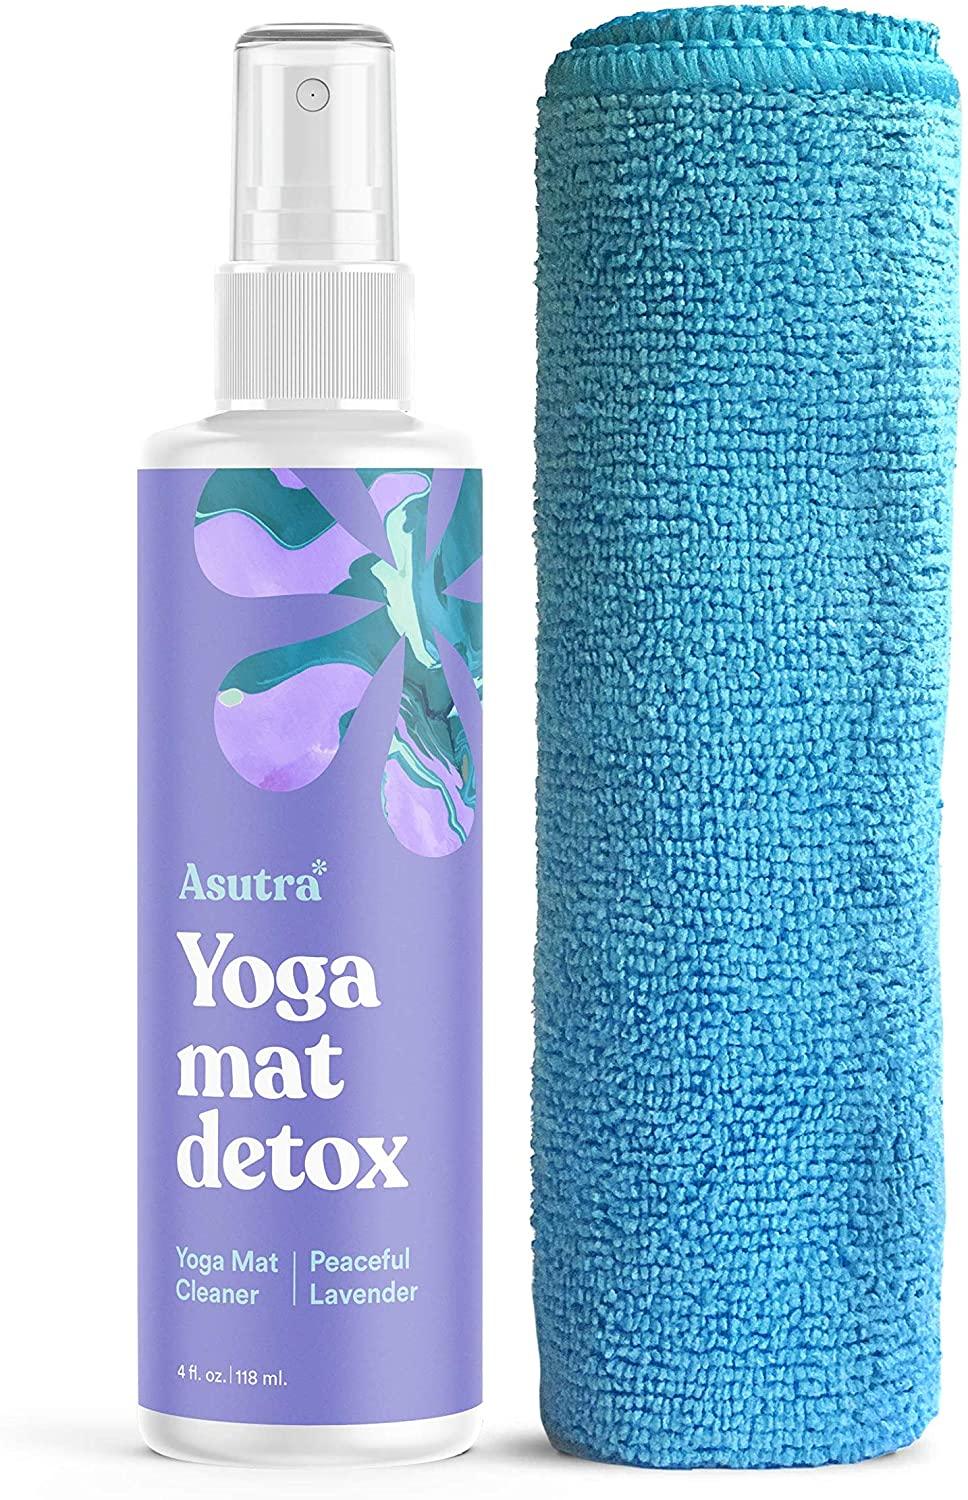 The best yoga mat cleaner